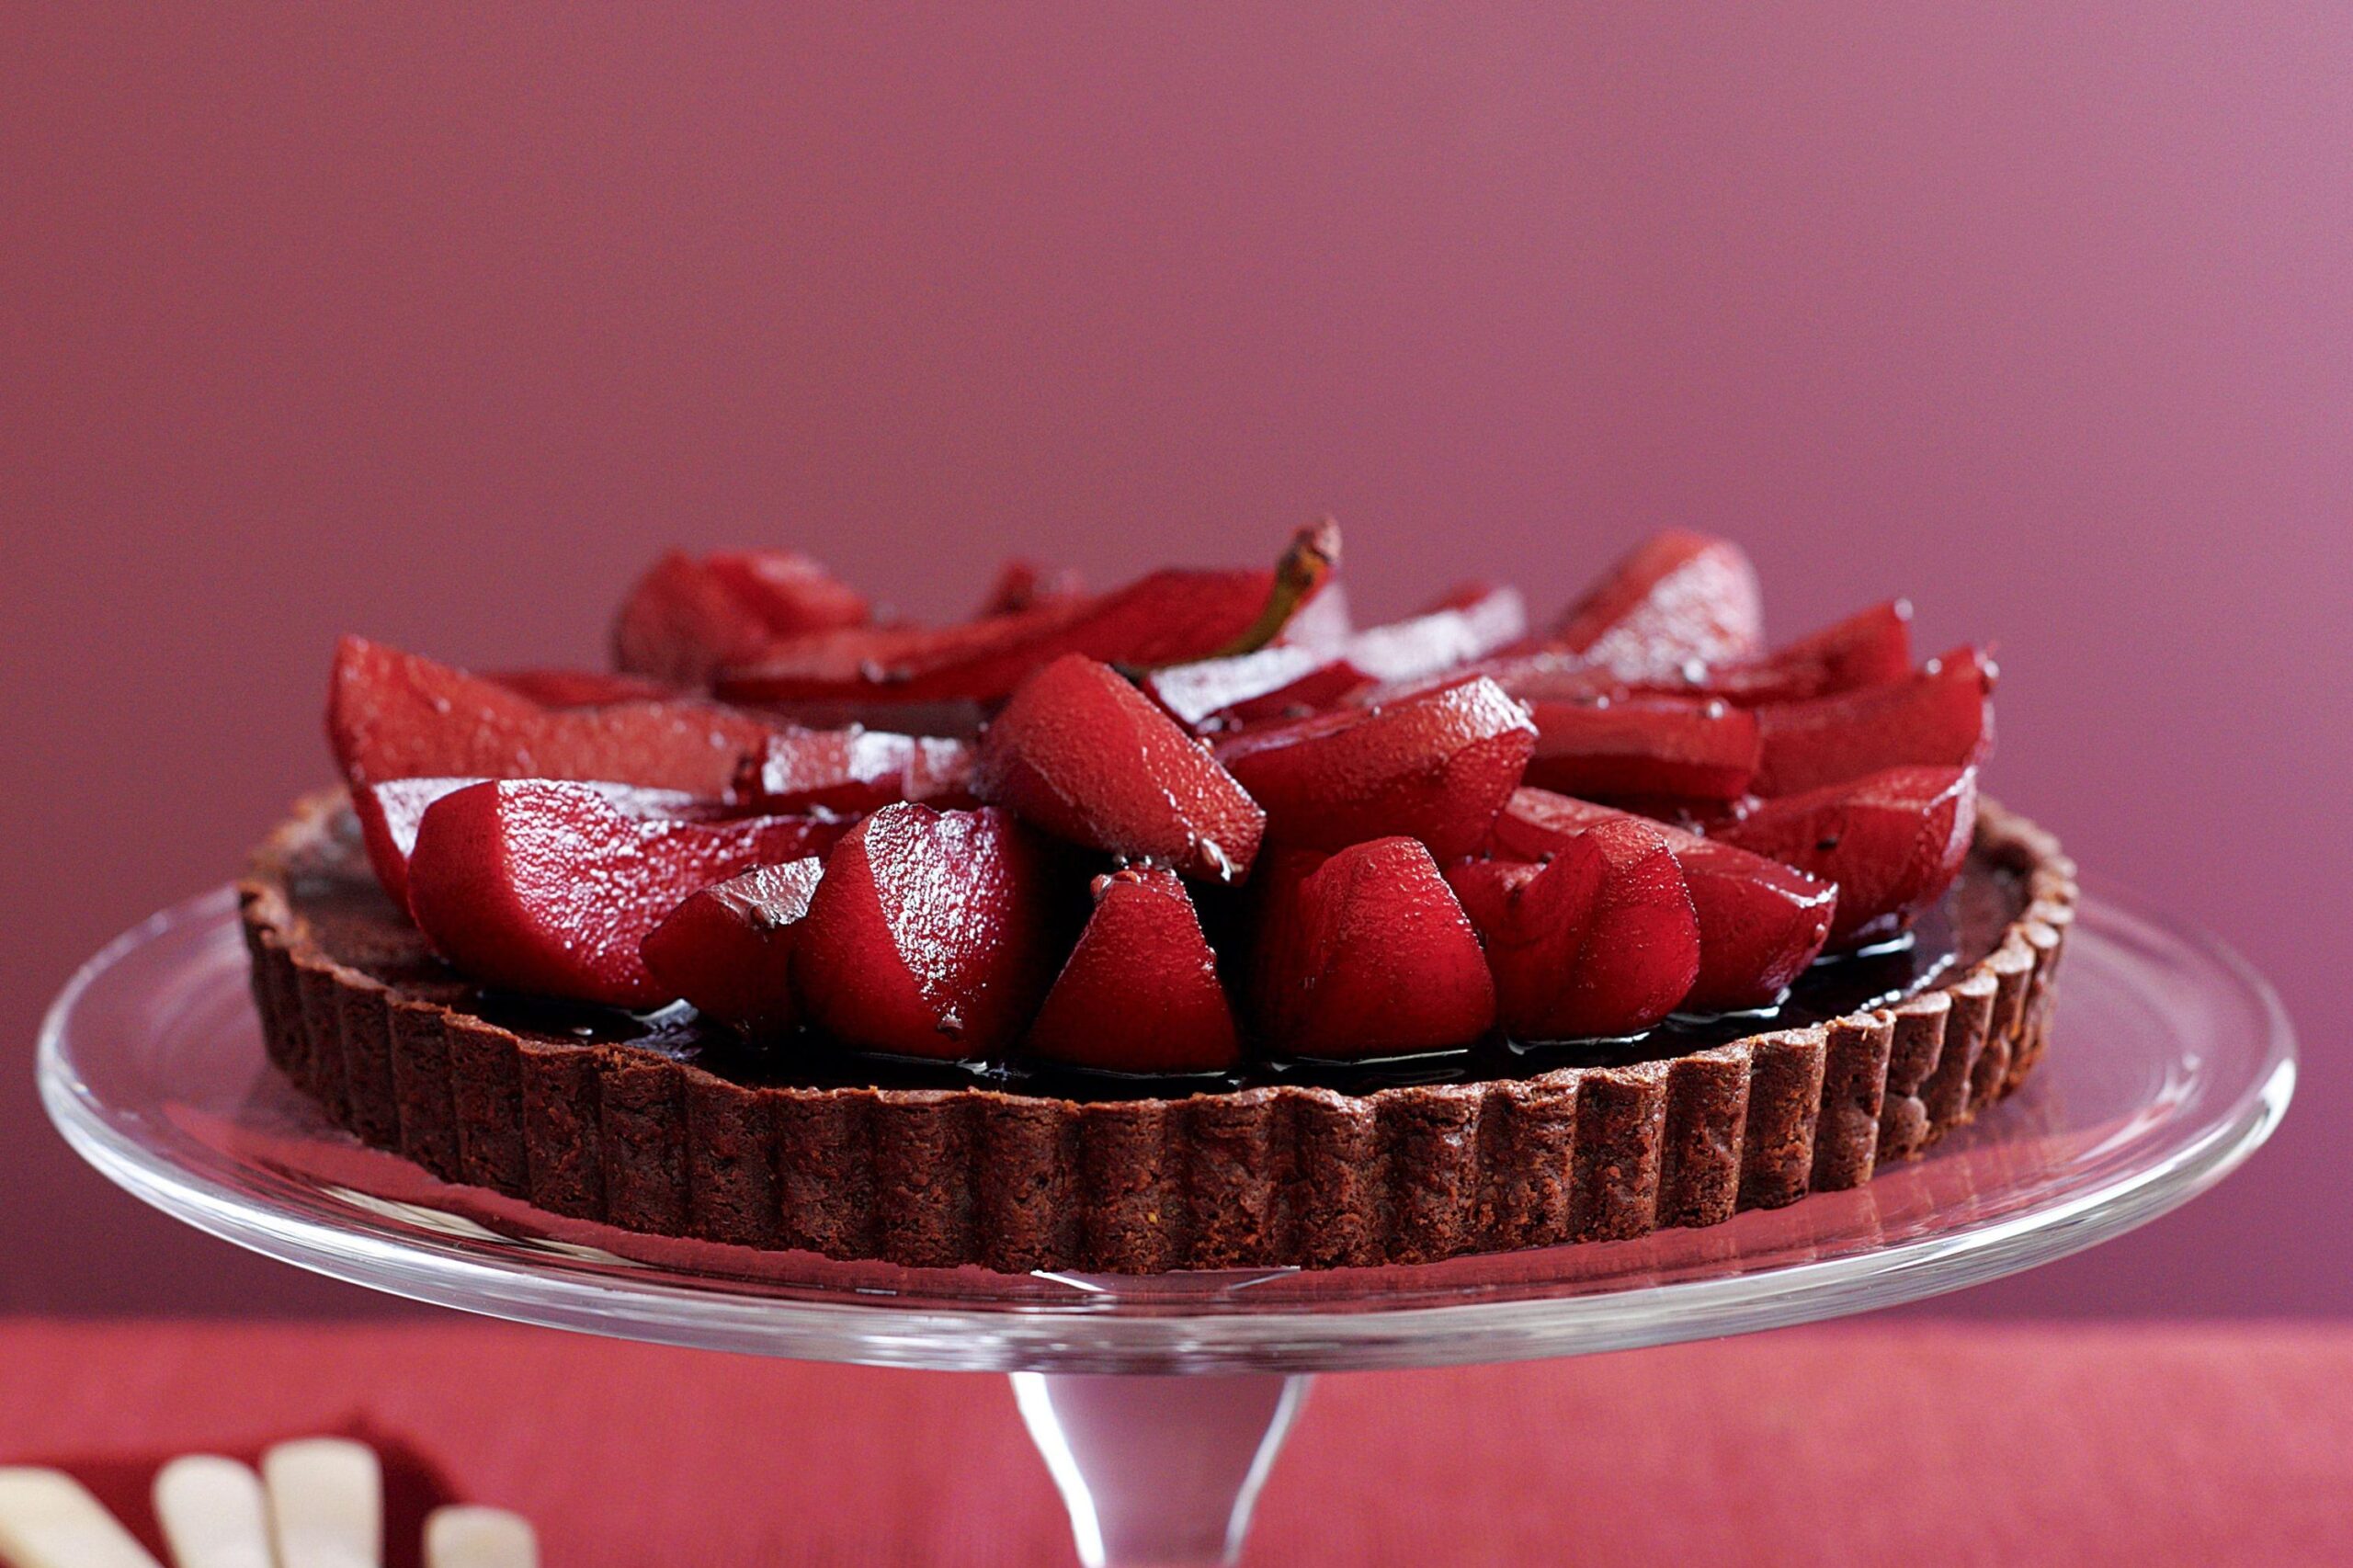  It may look fancy, but this stunning tart is easy to make and requires just a few simple ingredients!